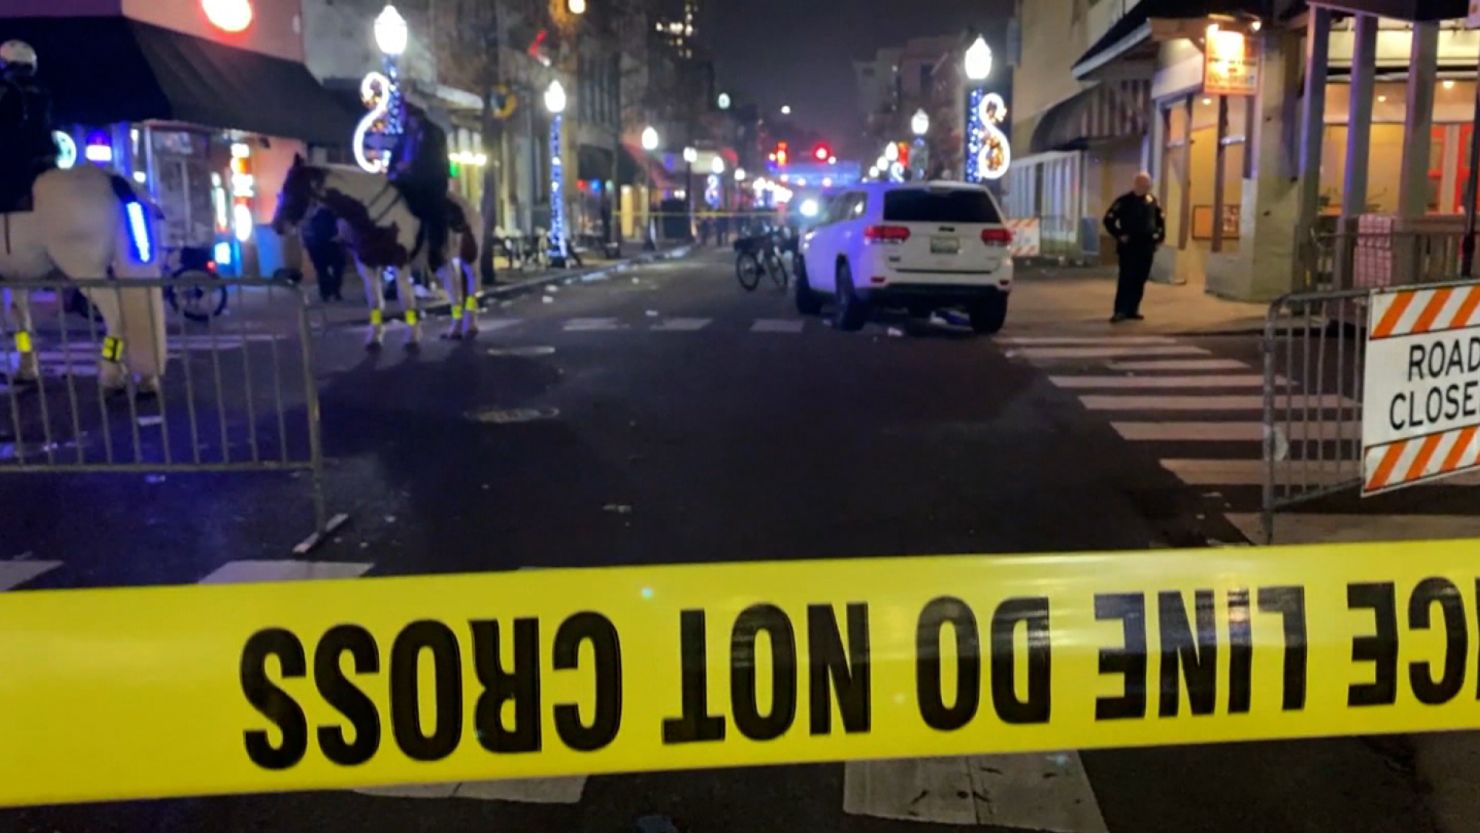 The scene of a shooting is seen on January 1, 2023, in Mobile, Alabama.